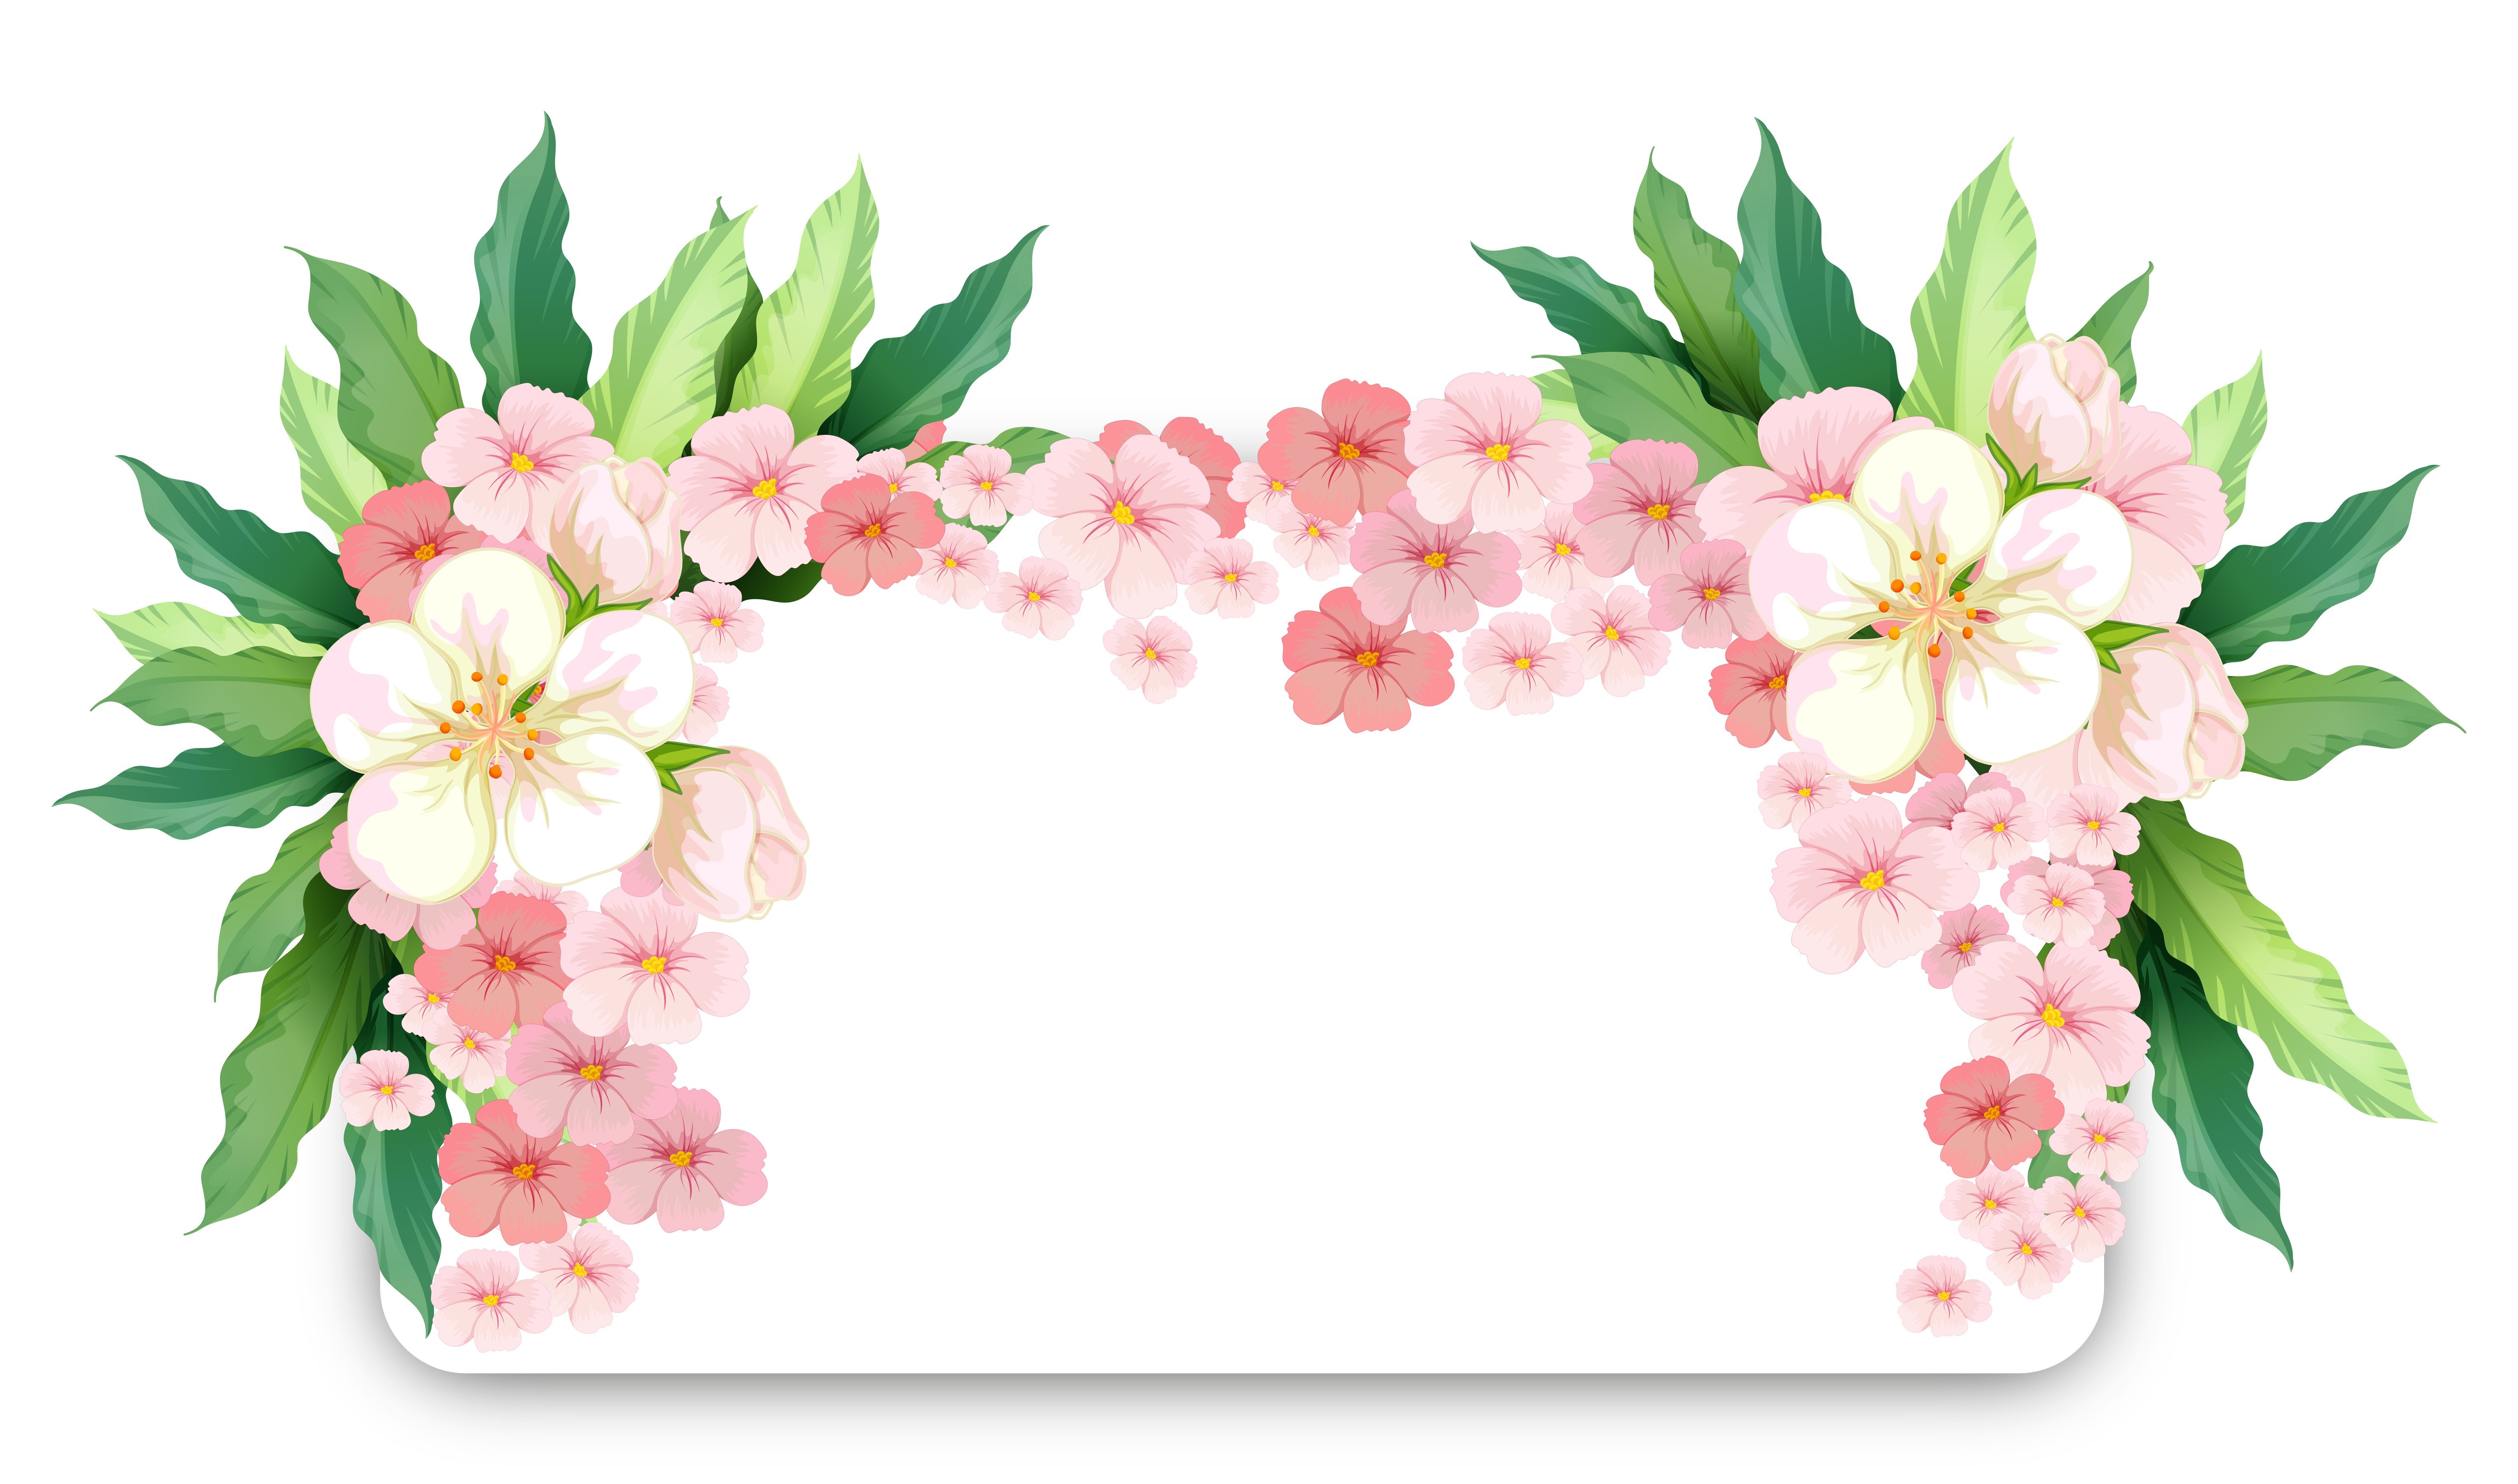 Download Border template with pink flowers - Download Free Vectors ...